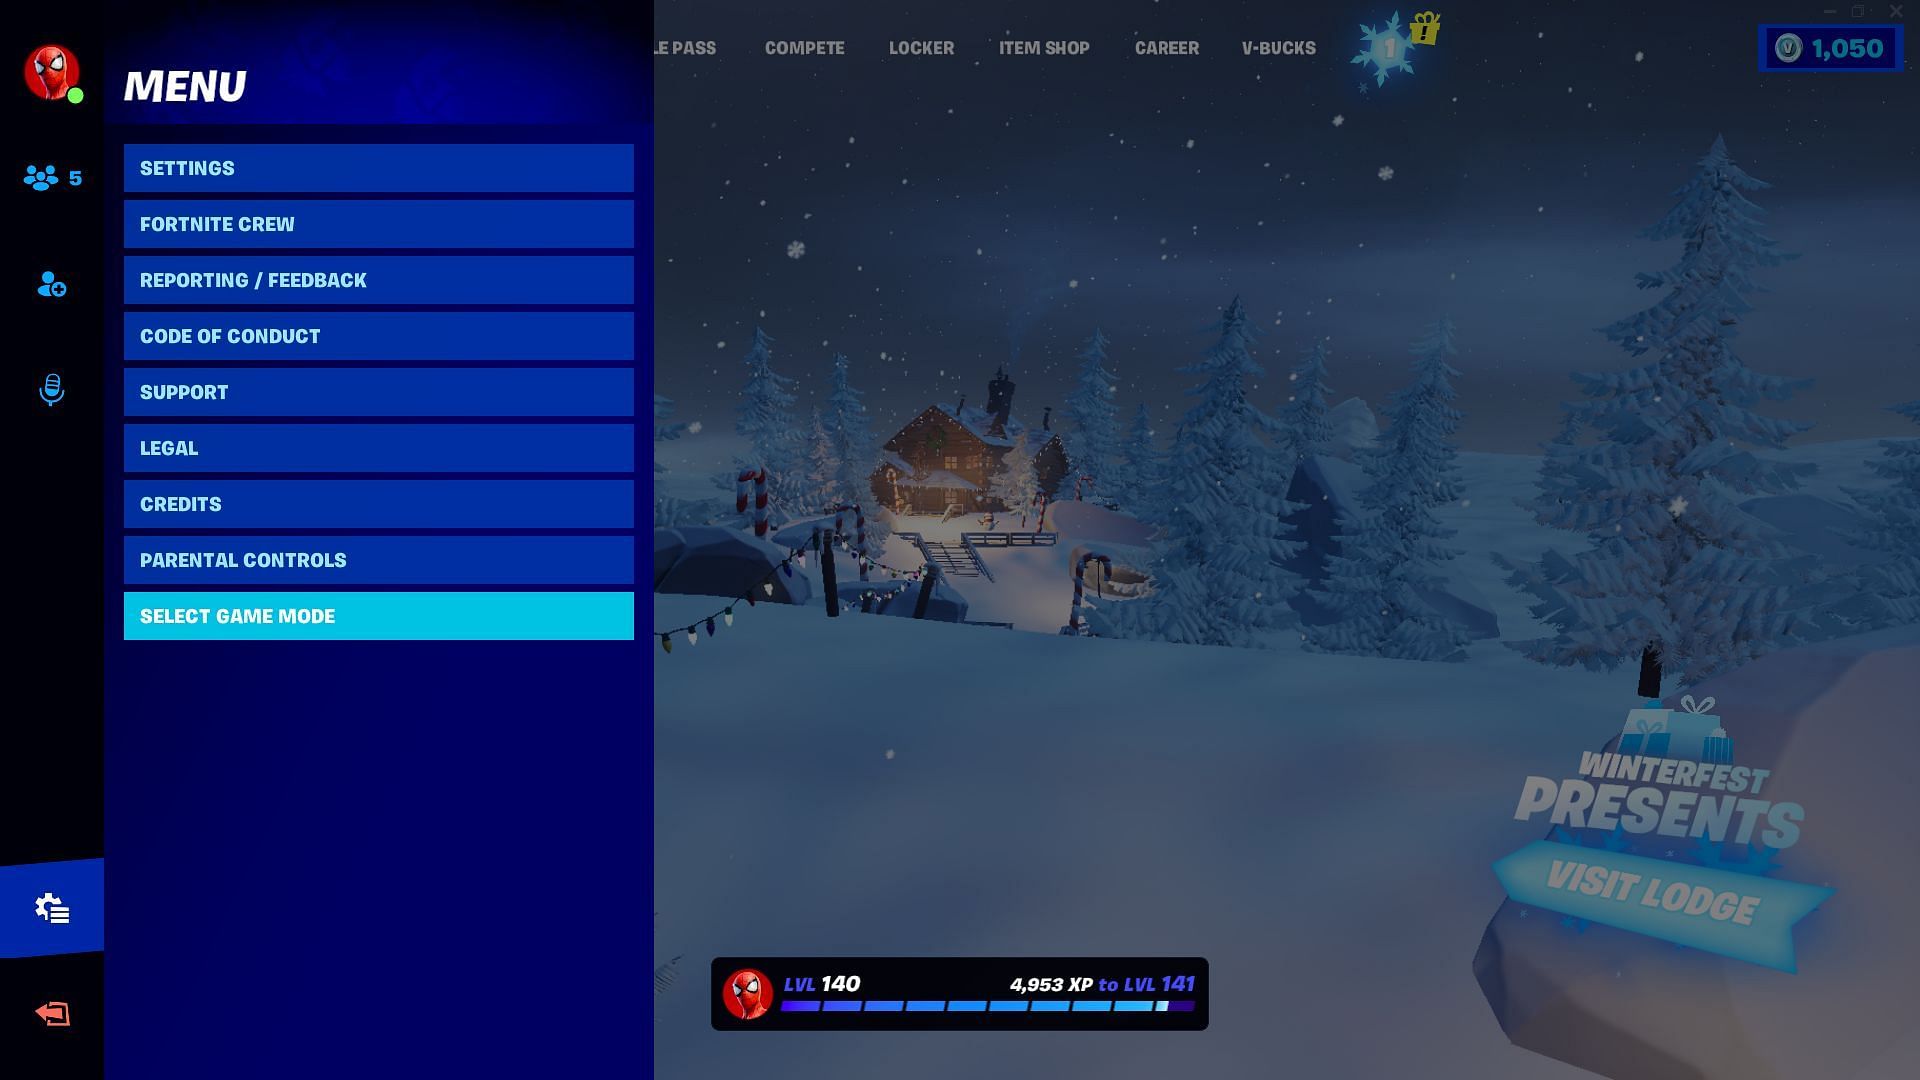 Select Game Mode to Glitch out presents in Winterfest Lodge (Image via Sportskeeda)